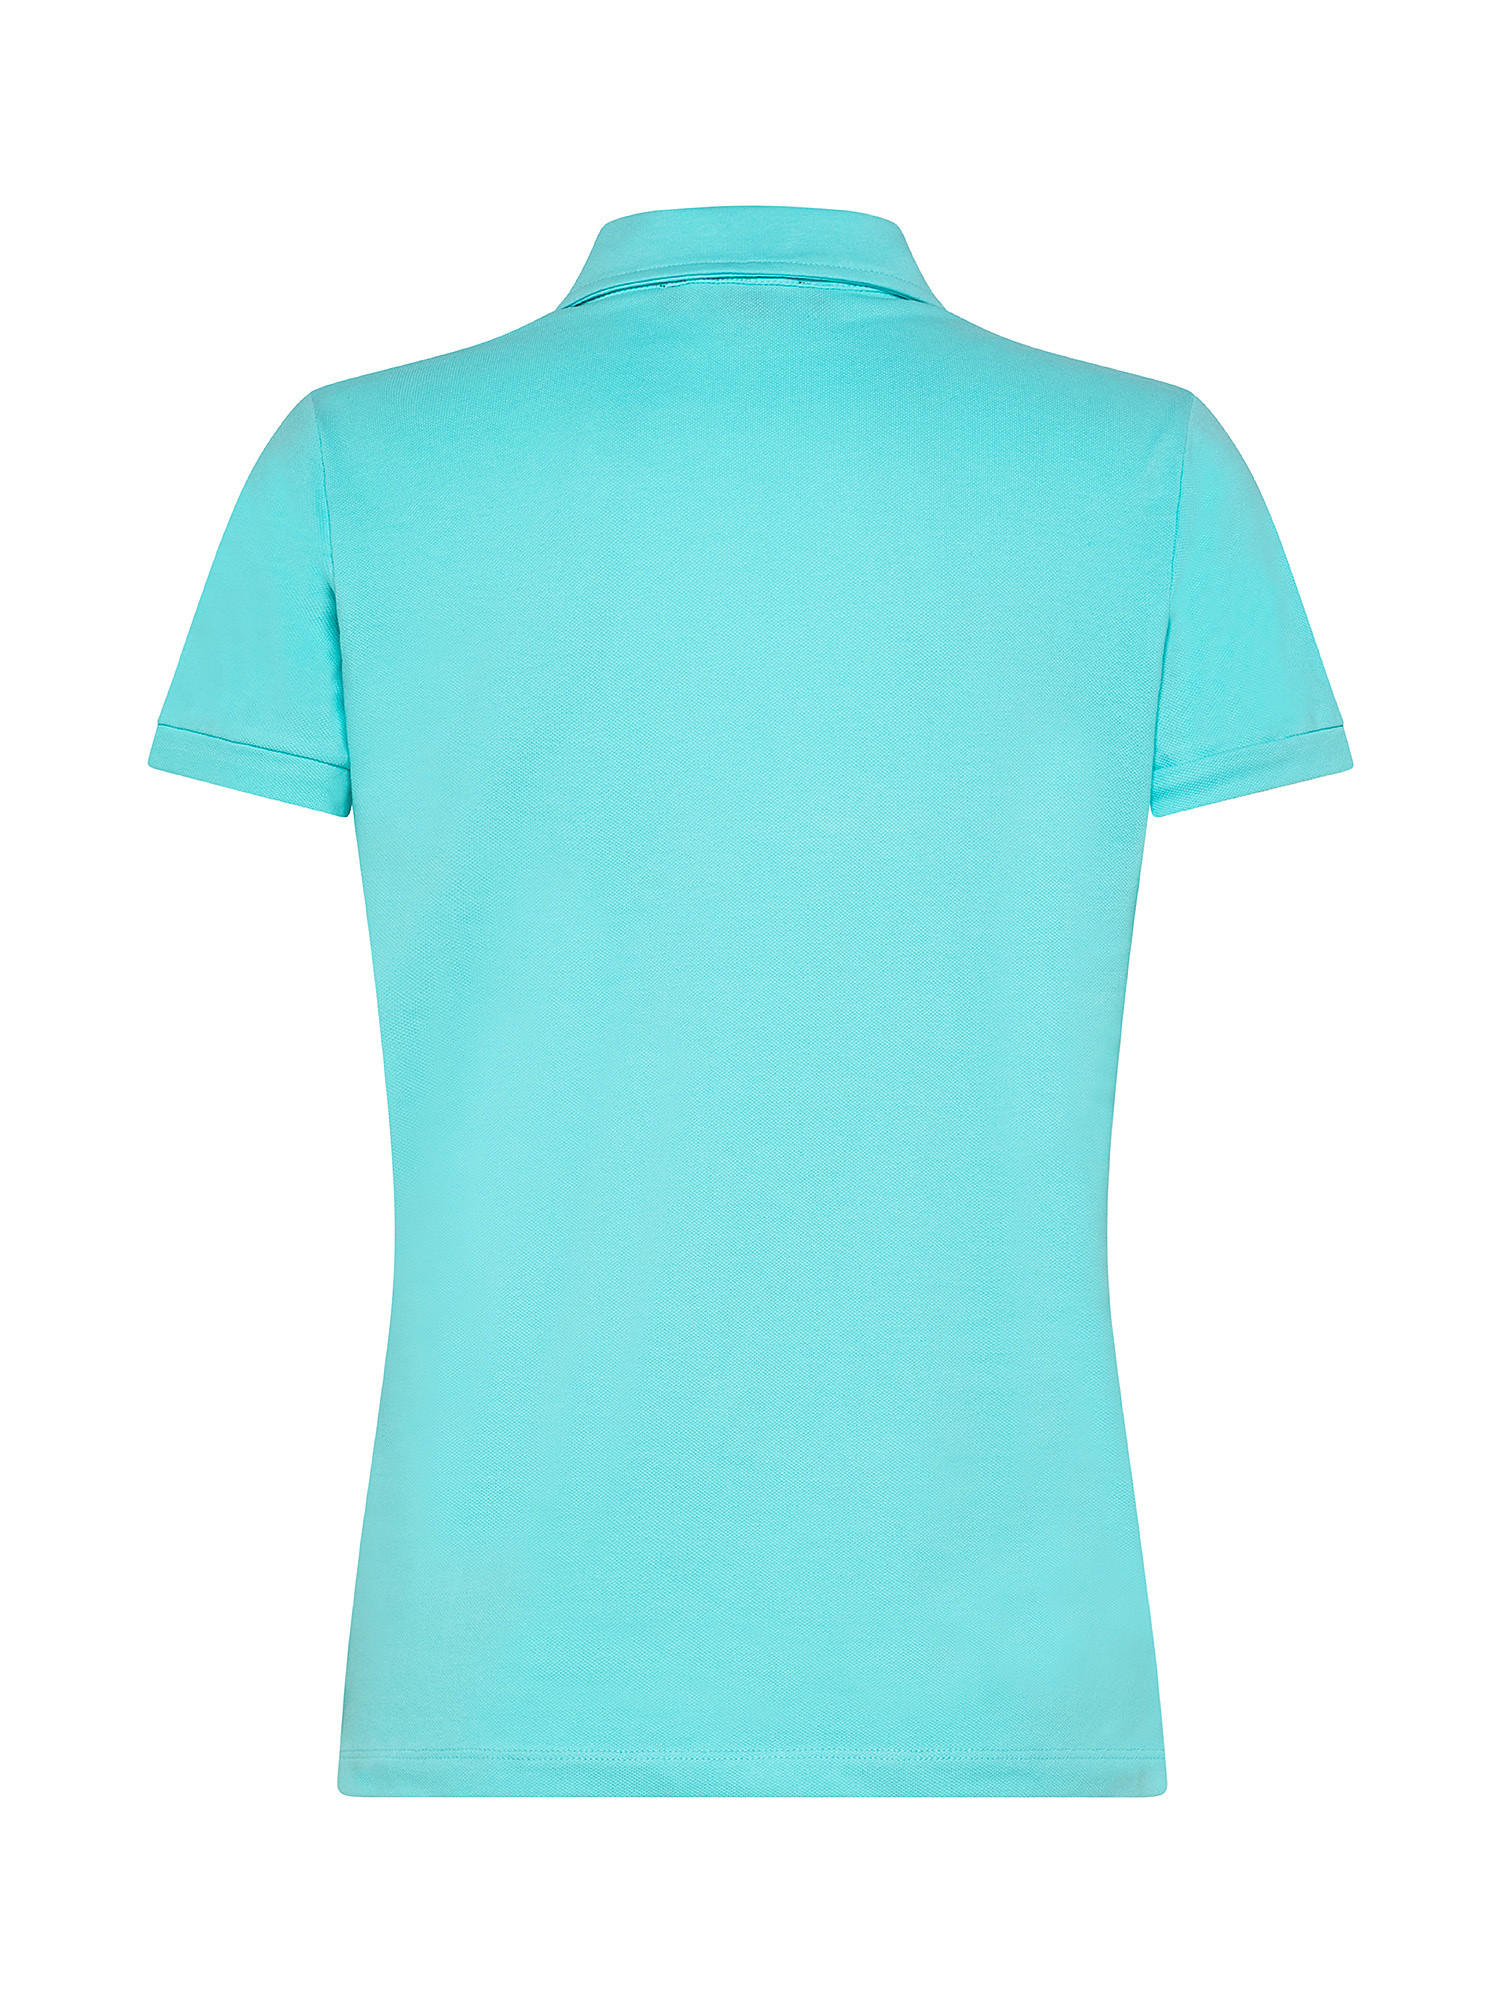 Polo shirt with rouches, Turquoise, large image number 1